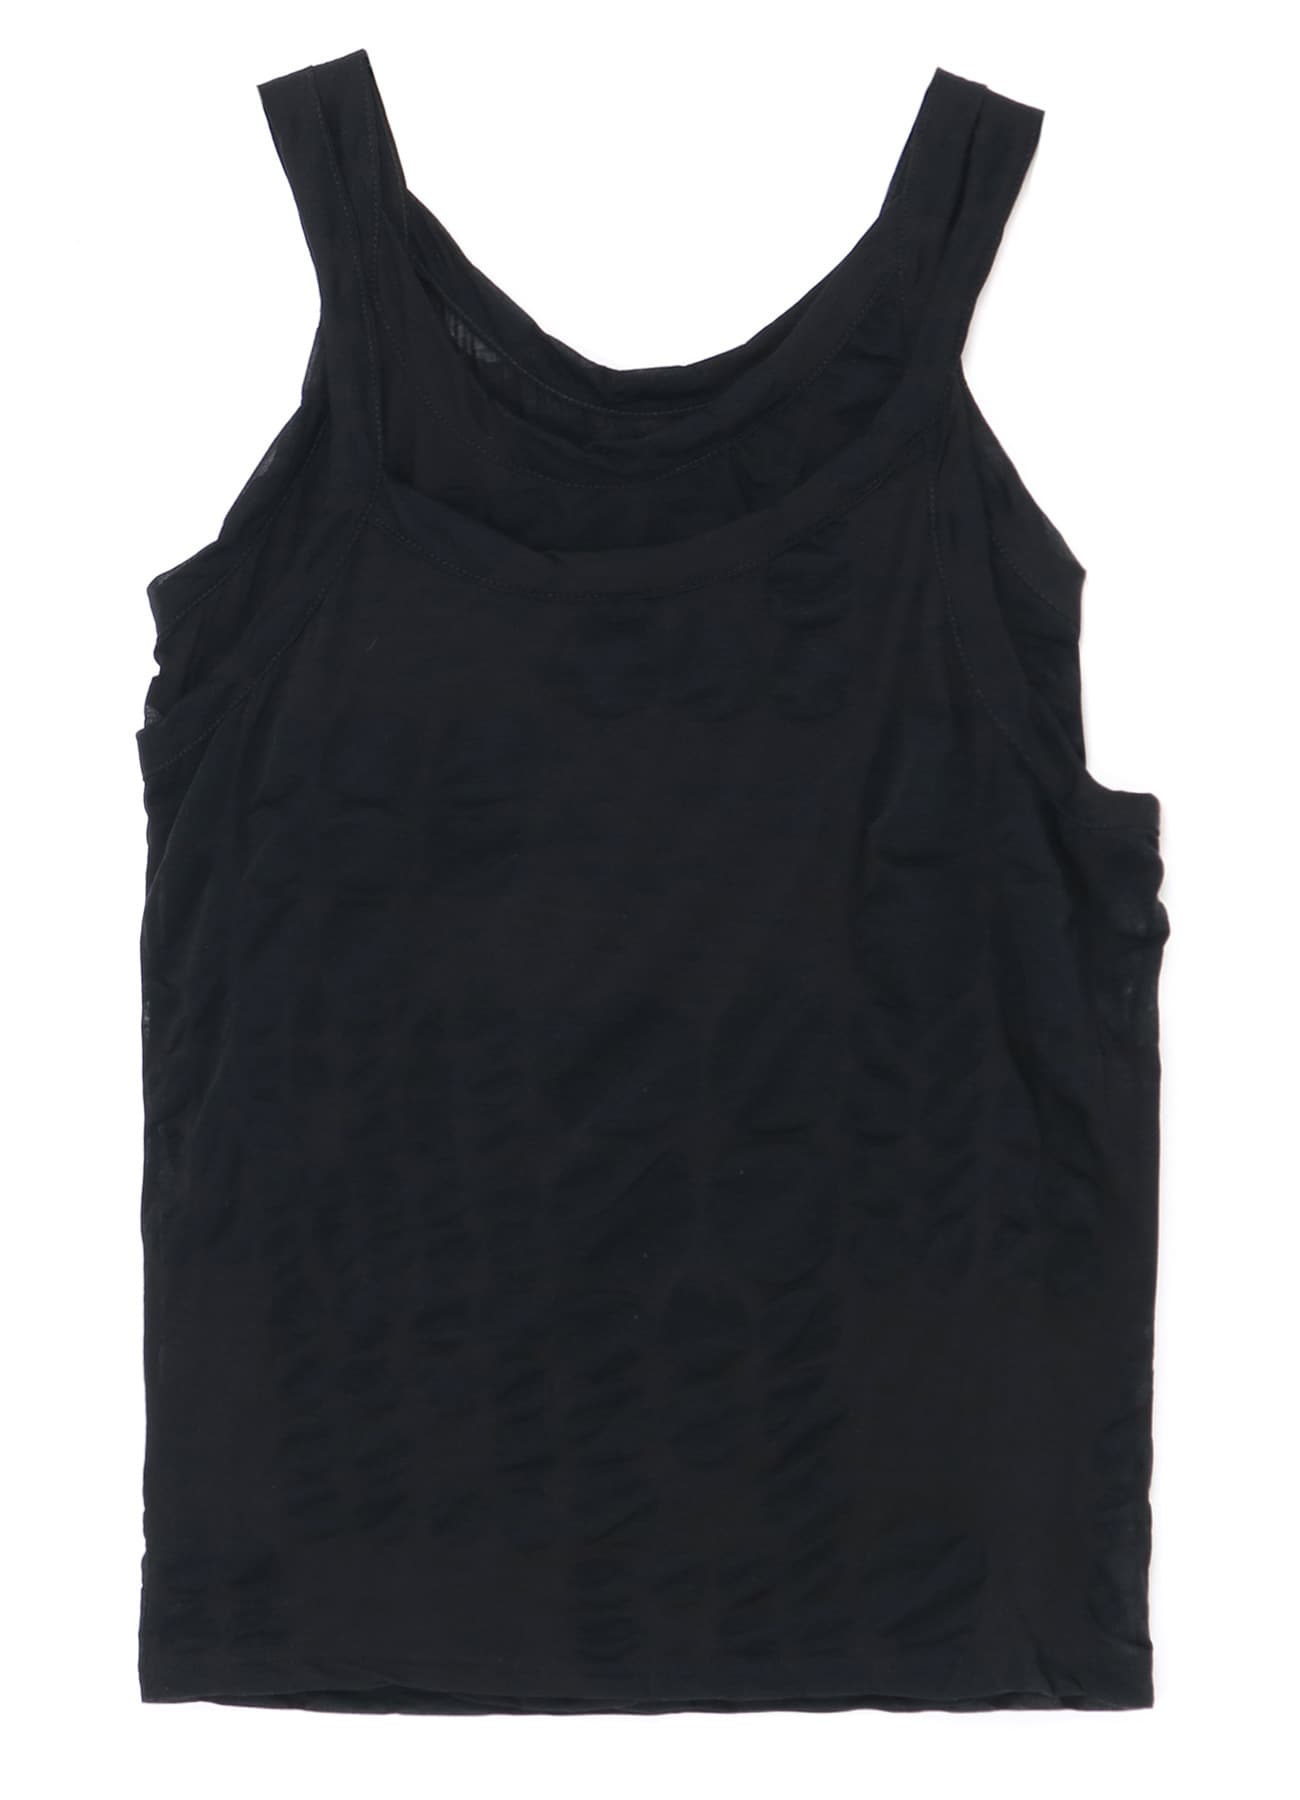 100/- COTTON DOUBLE LAYERED TANK TOP(S Black): Vintage 1.1｜THE 